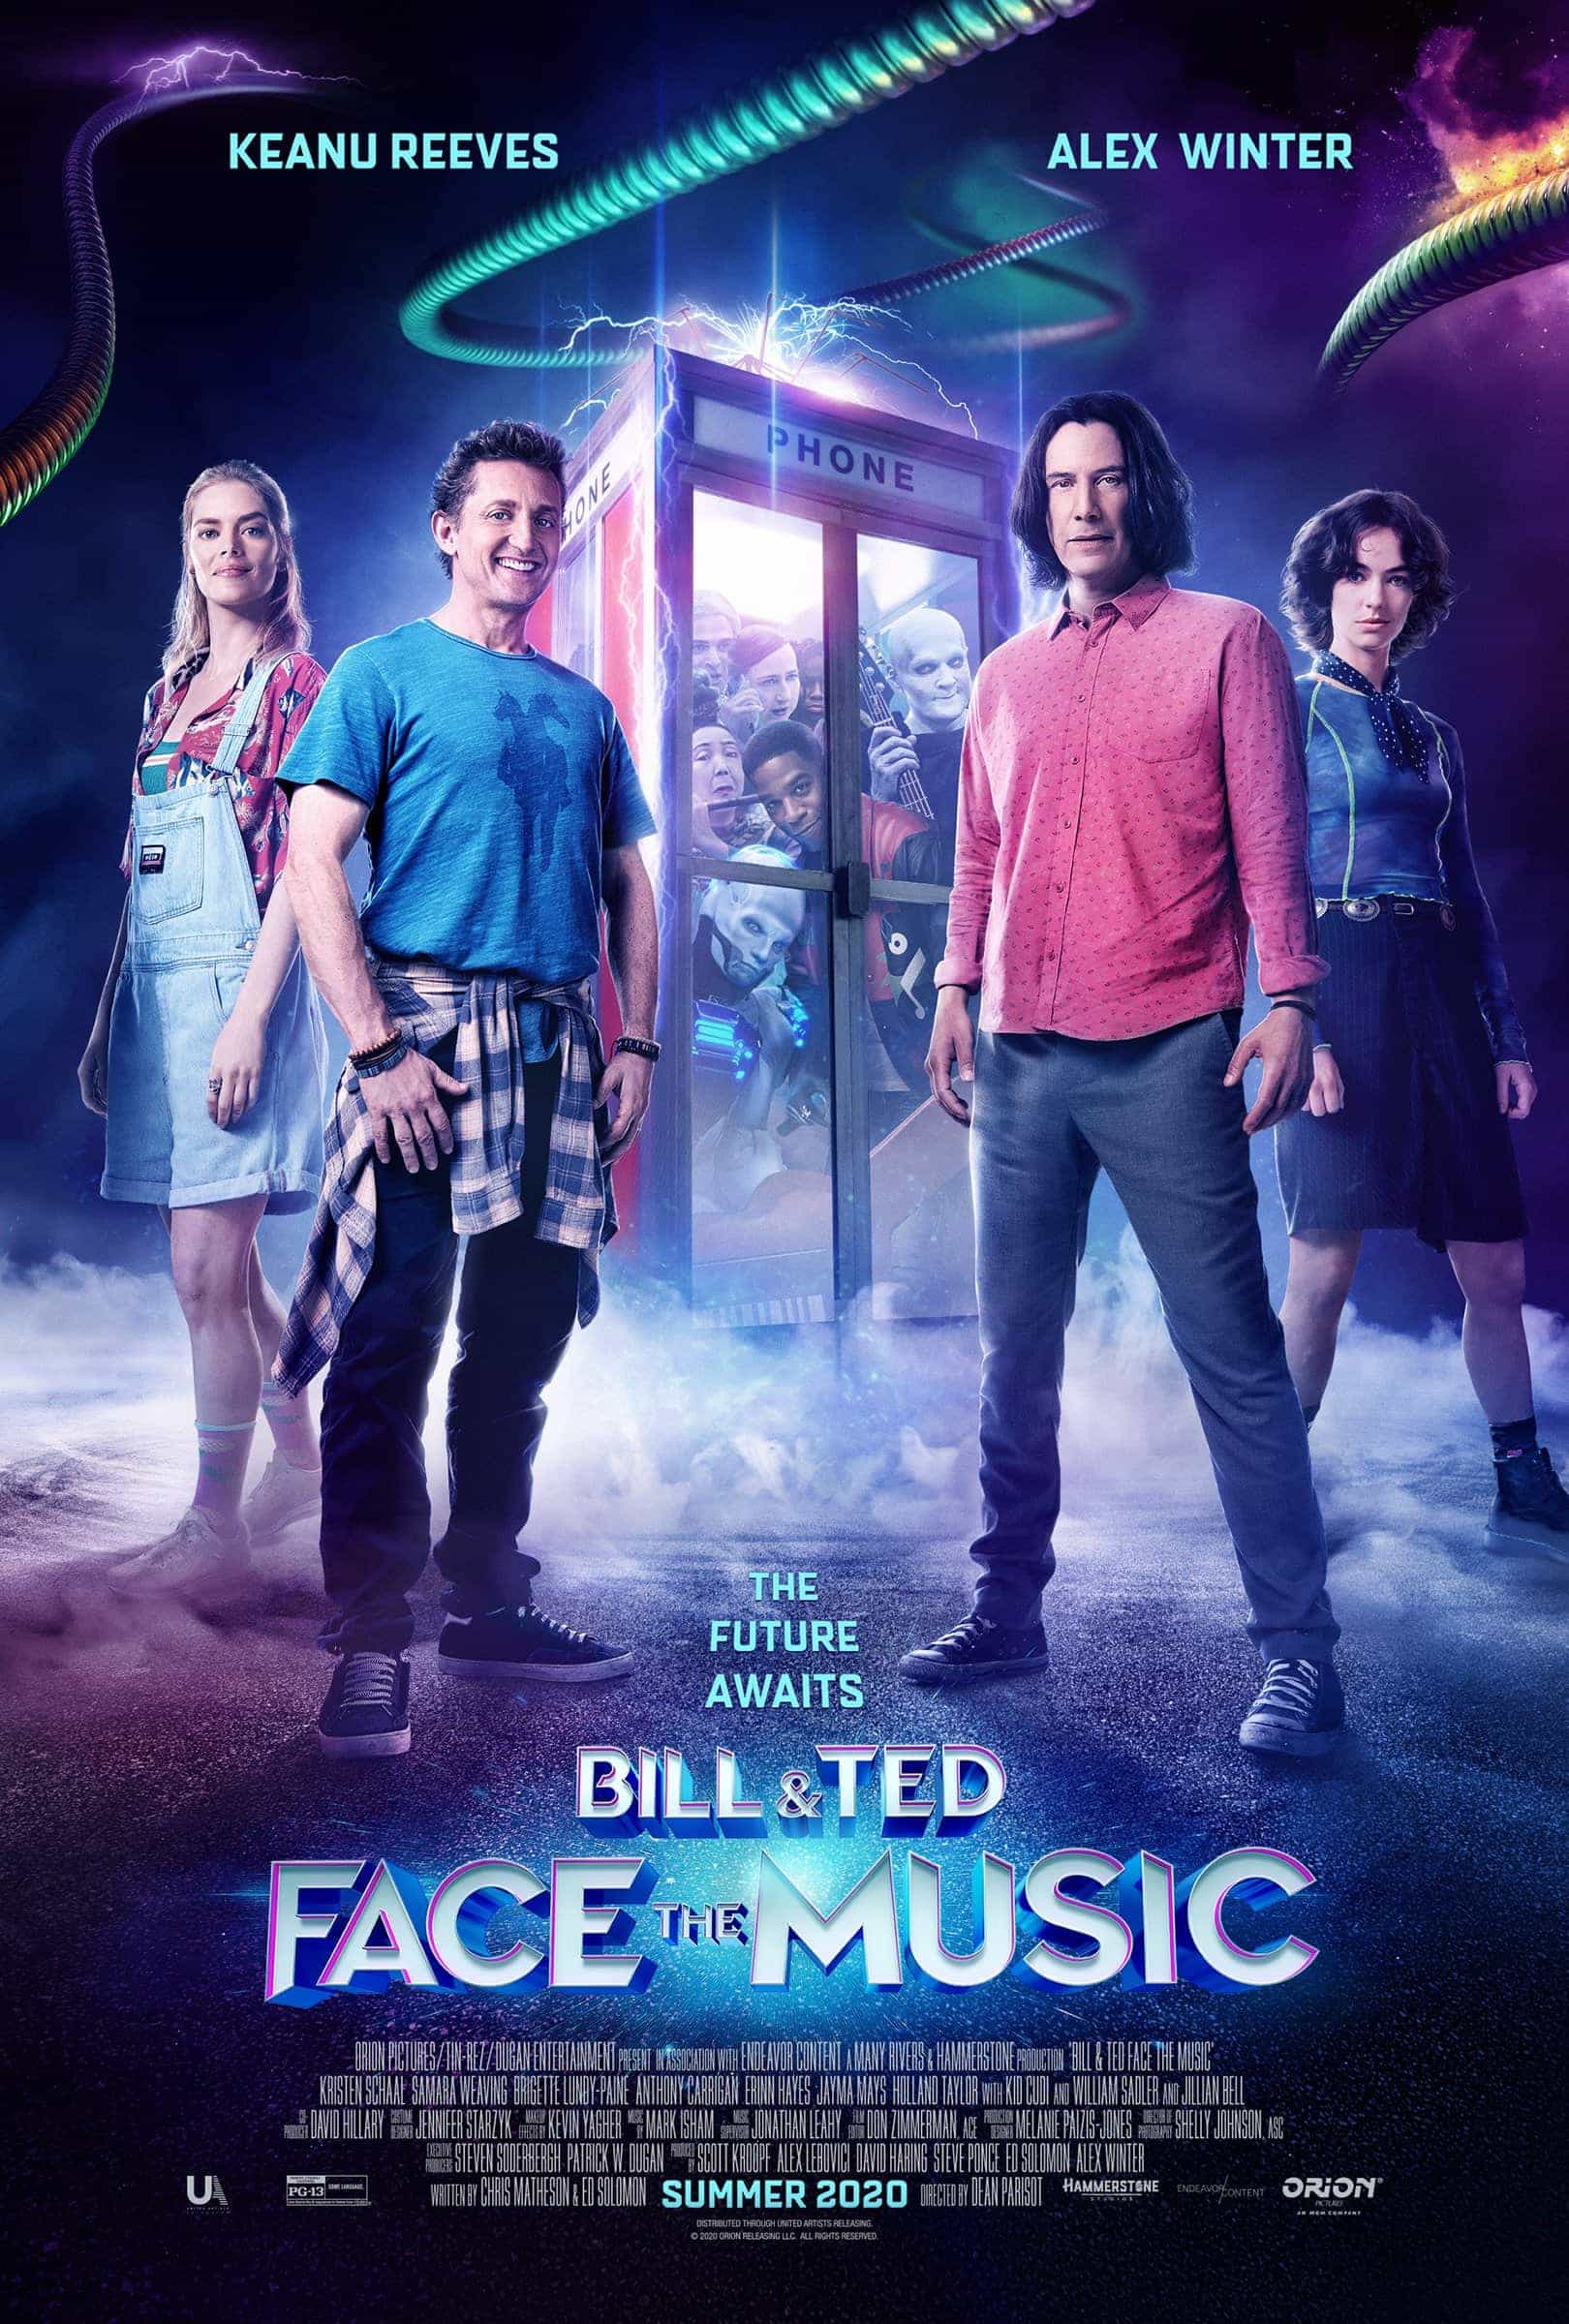 New poster and release date for Bill And Ted Face The Music starring Keanu Reeves - movie released to cinemas and VOD on 1st September 2020